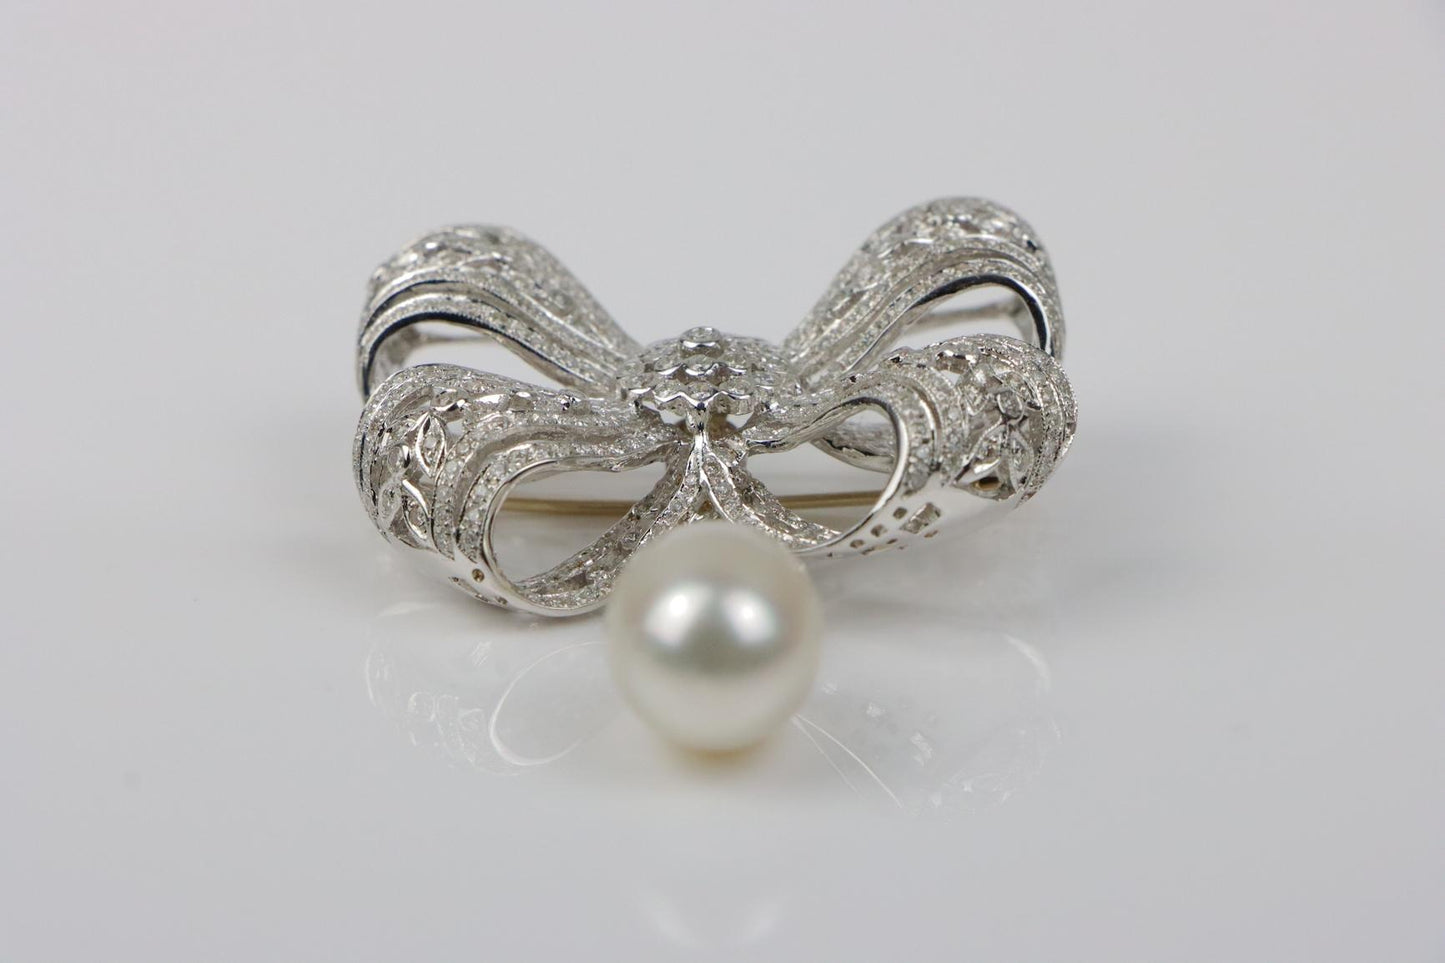 Vintage 18K White Gold Diamond Pearl Bow Tie Brooch Pin